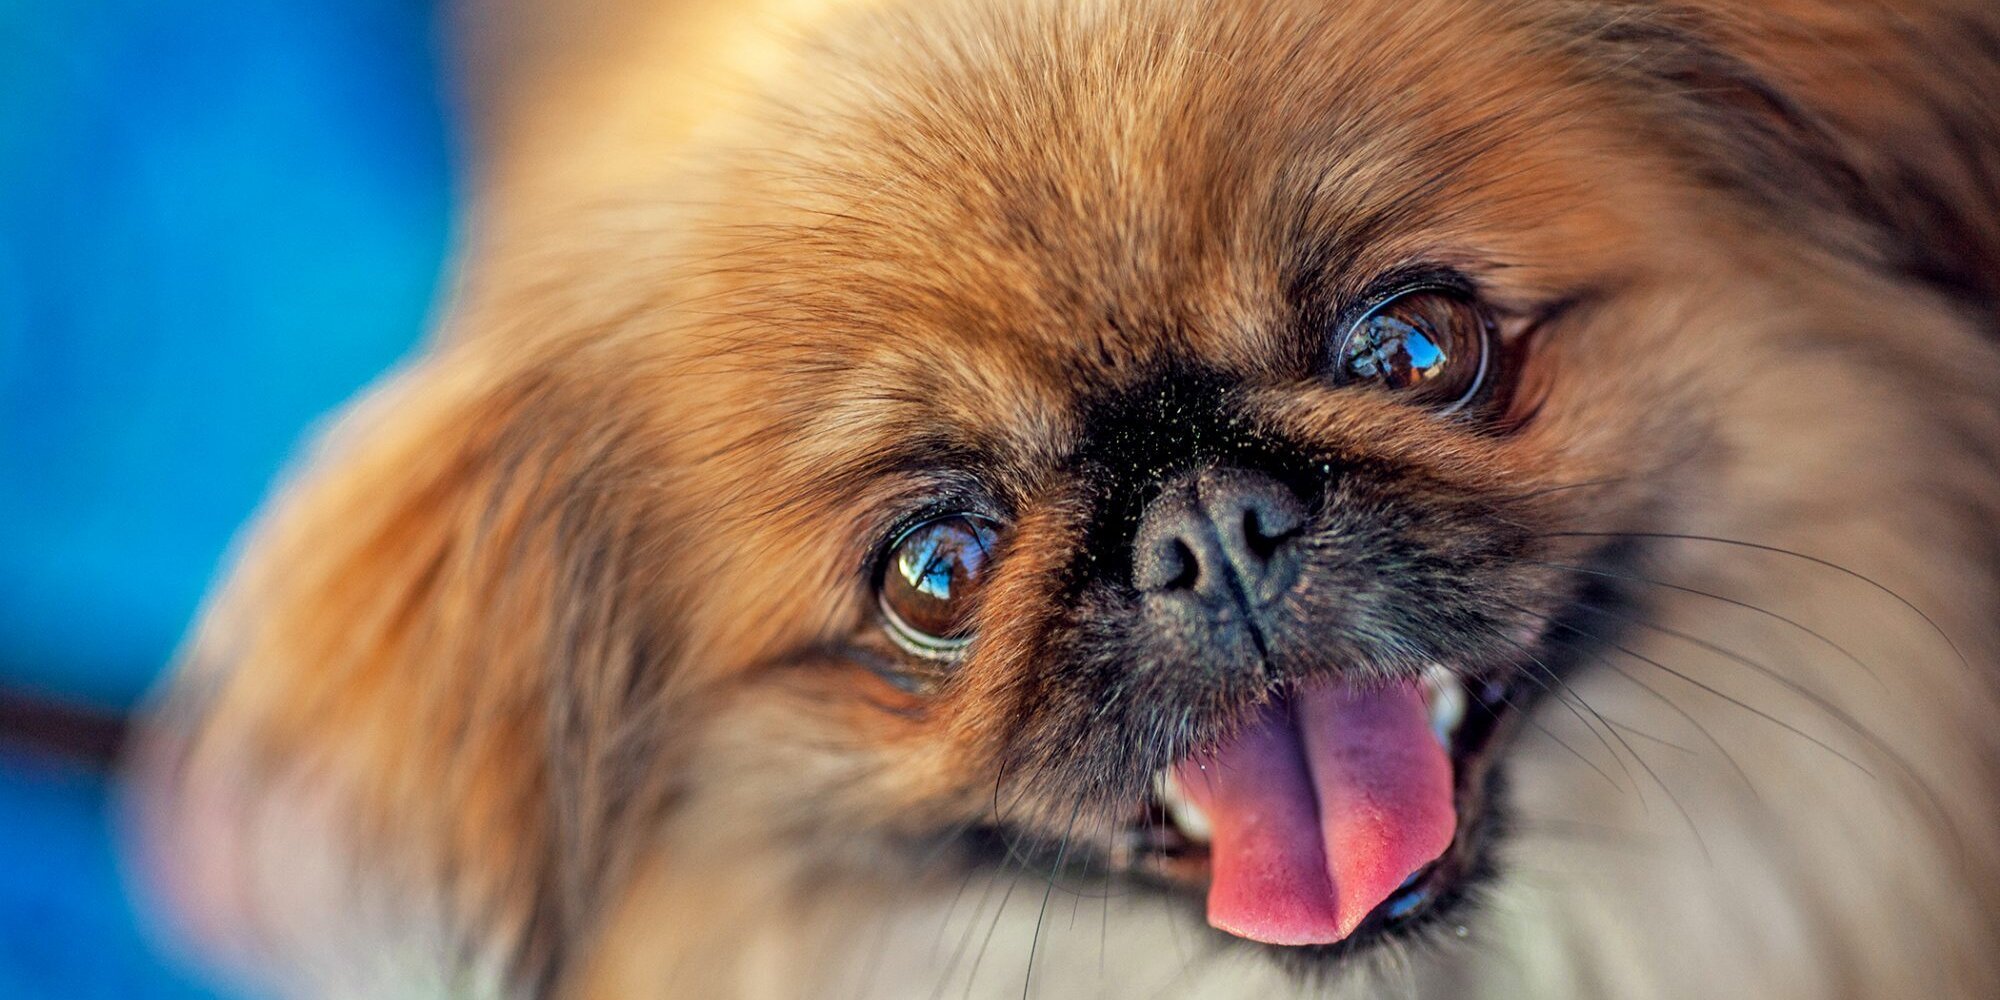 People Say These 14 Dog Breeds Are Ugly. We Disagree!